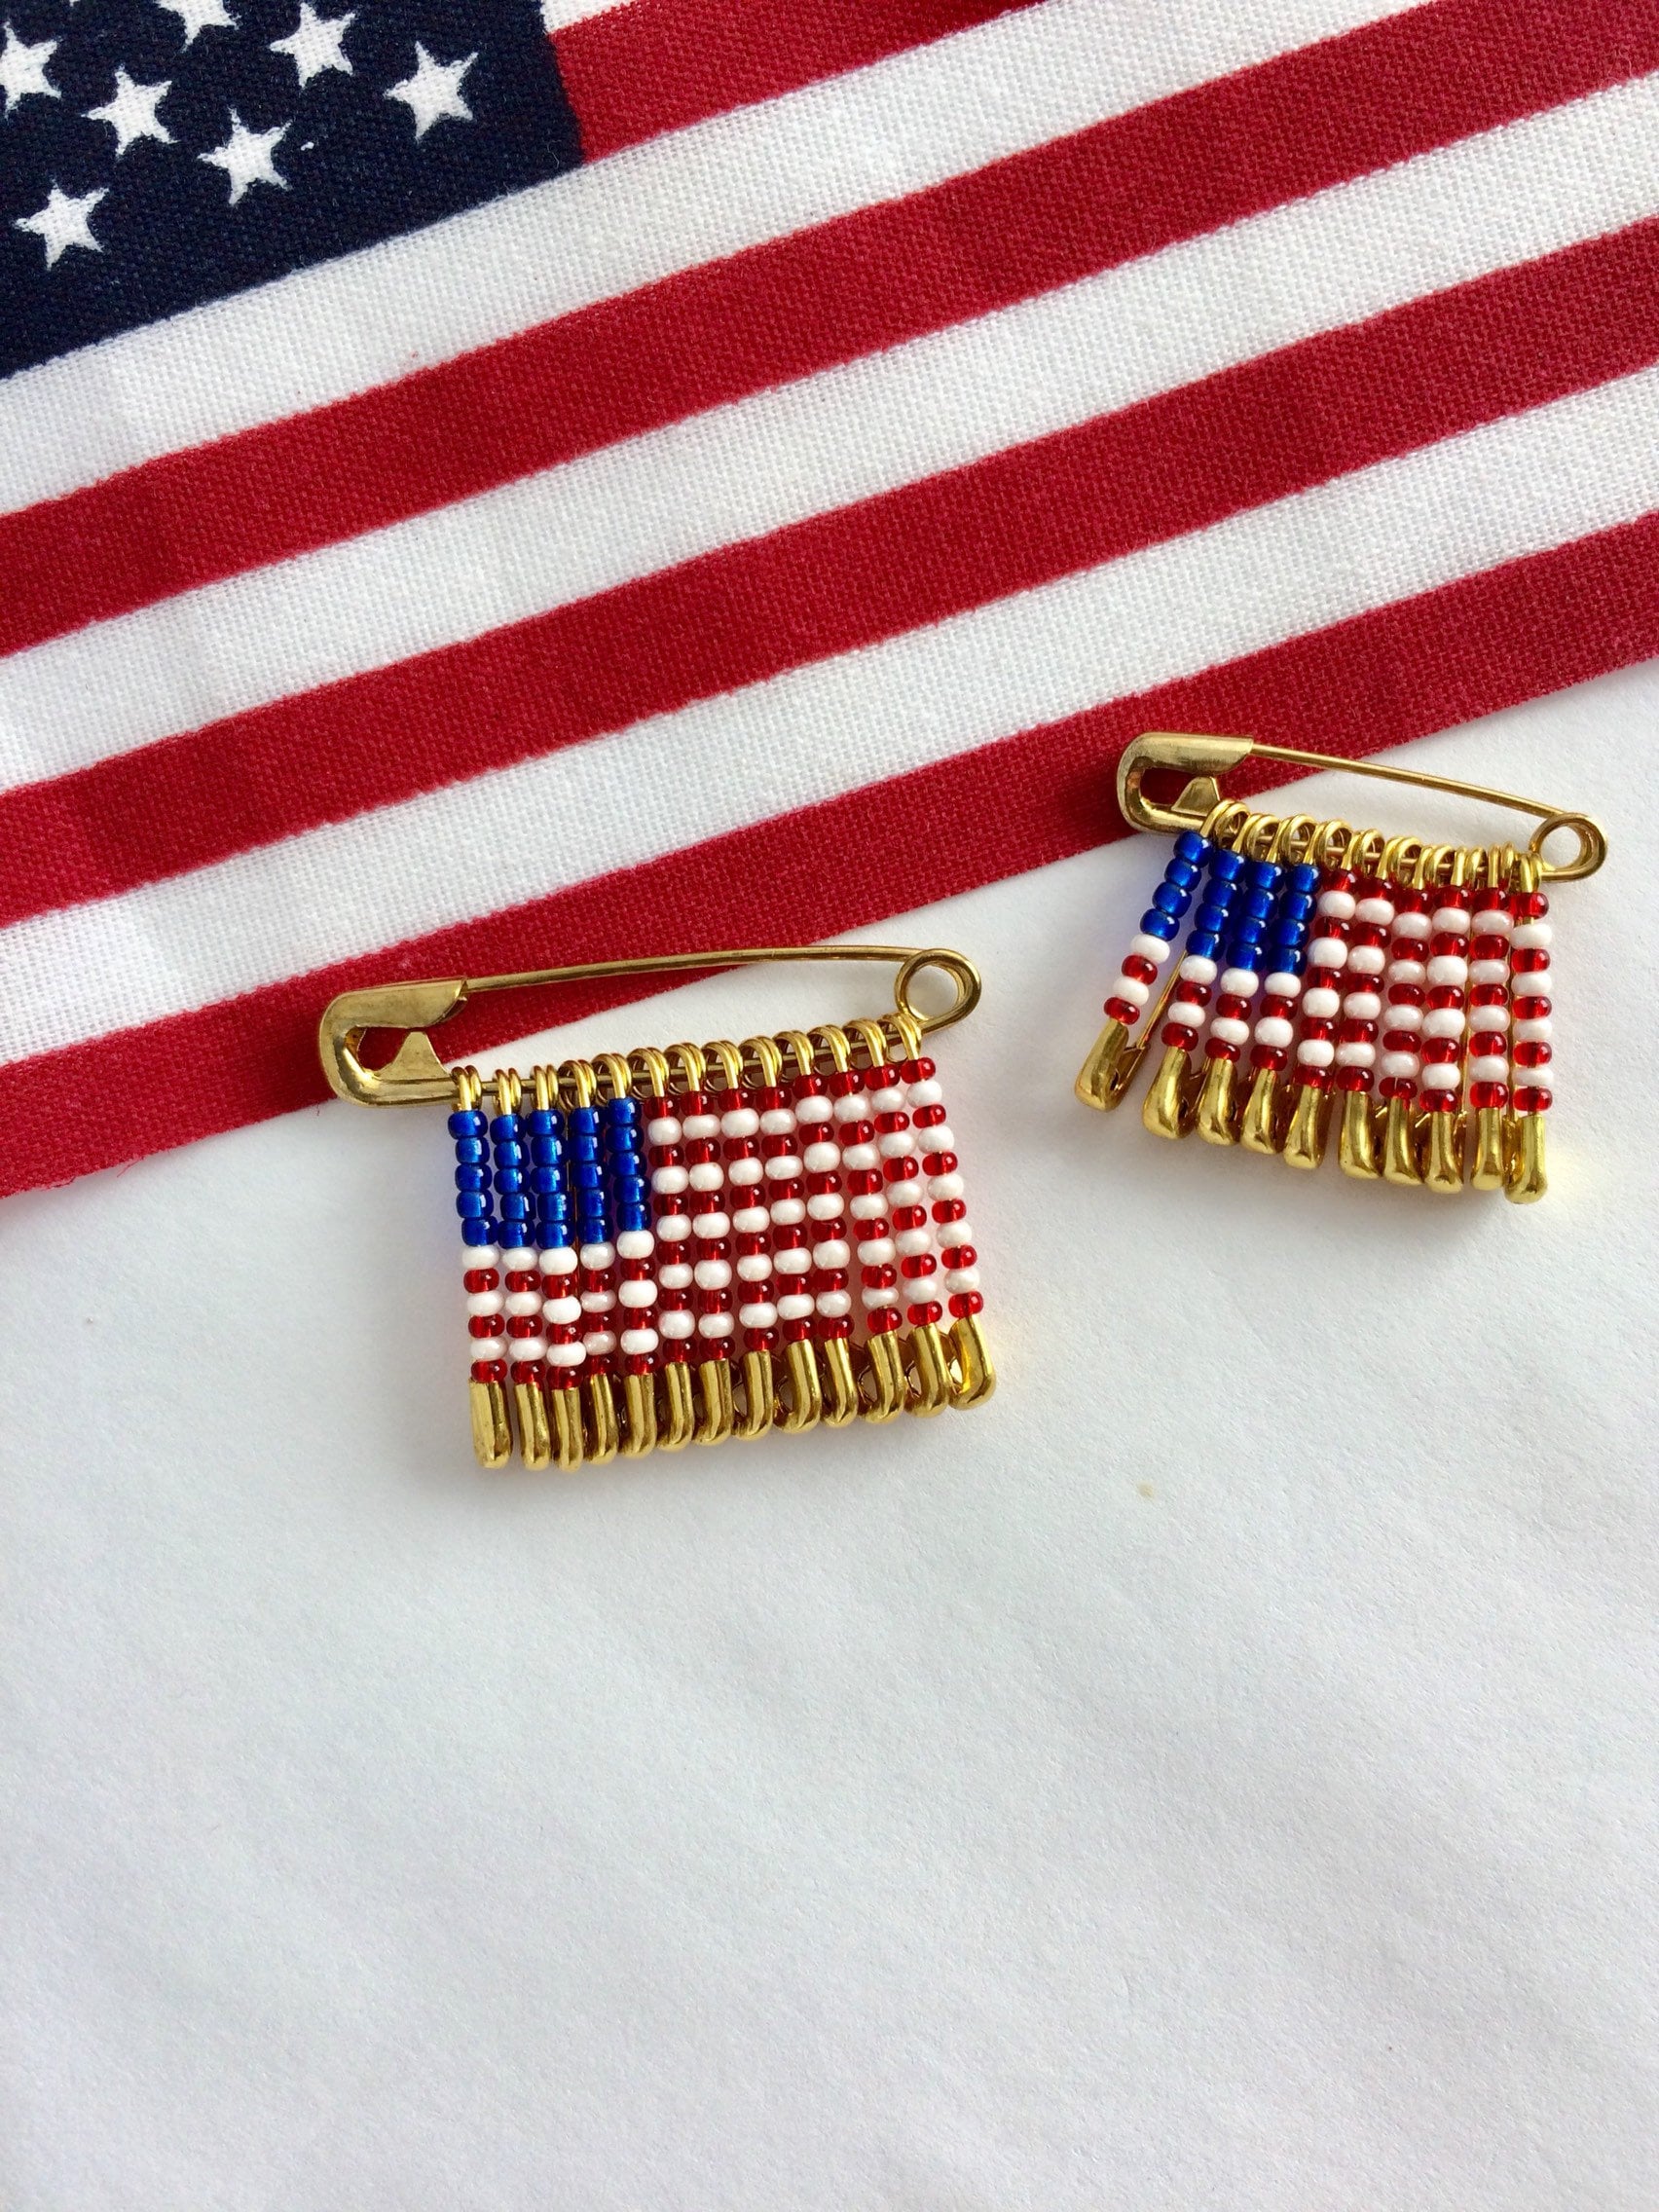 American flag Safety pin